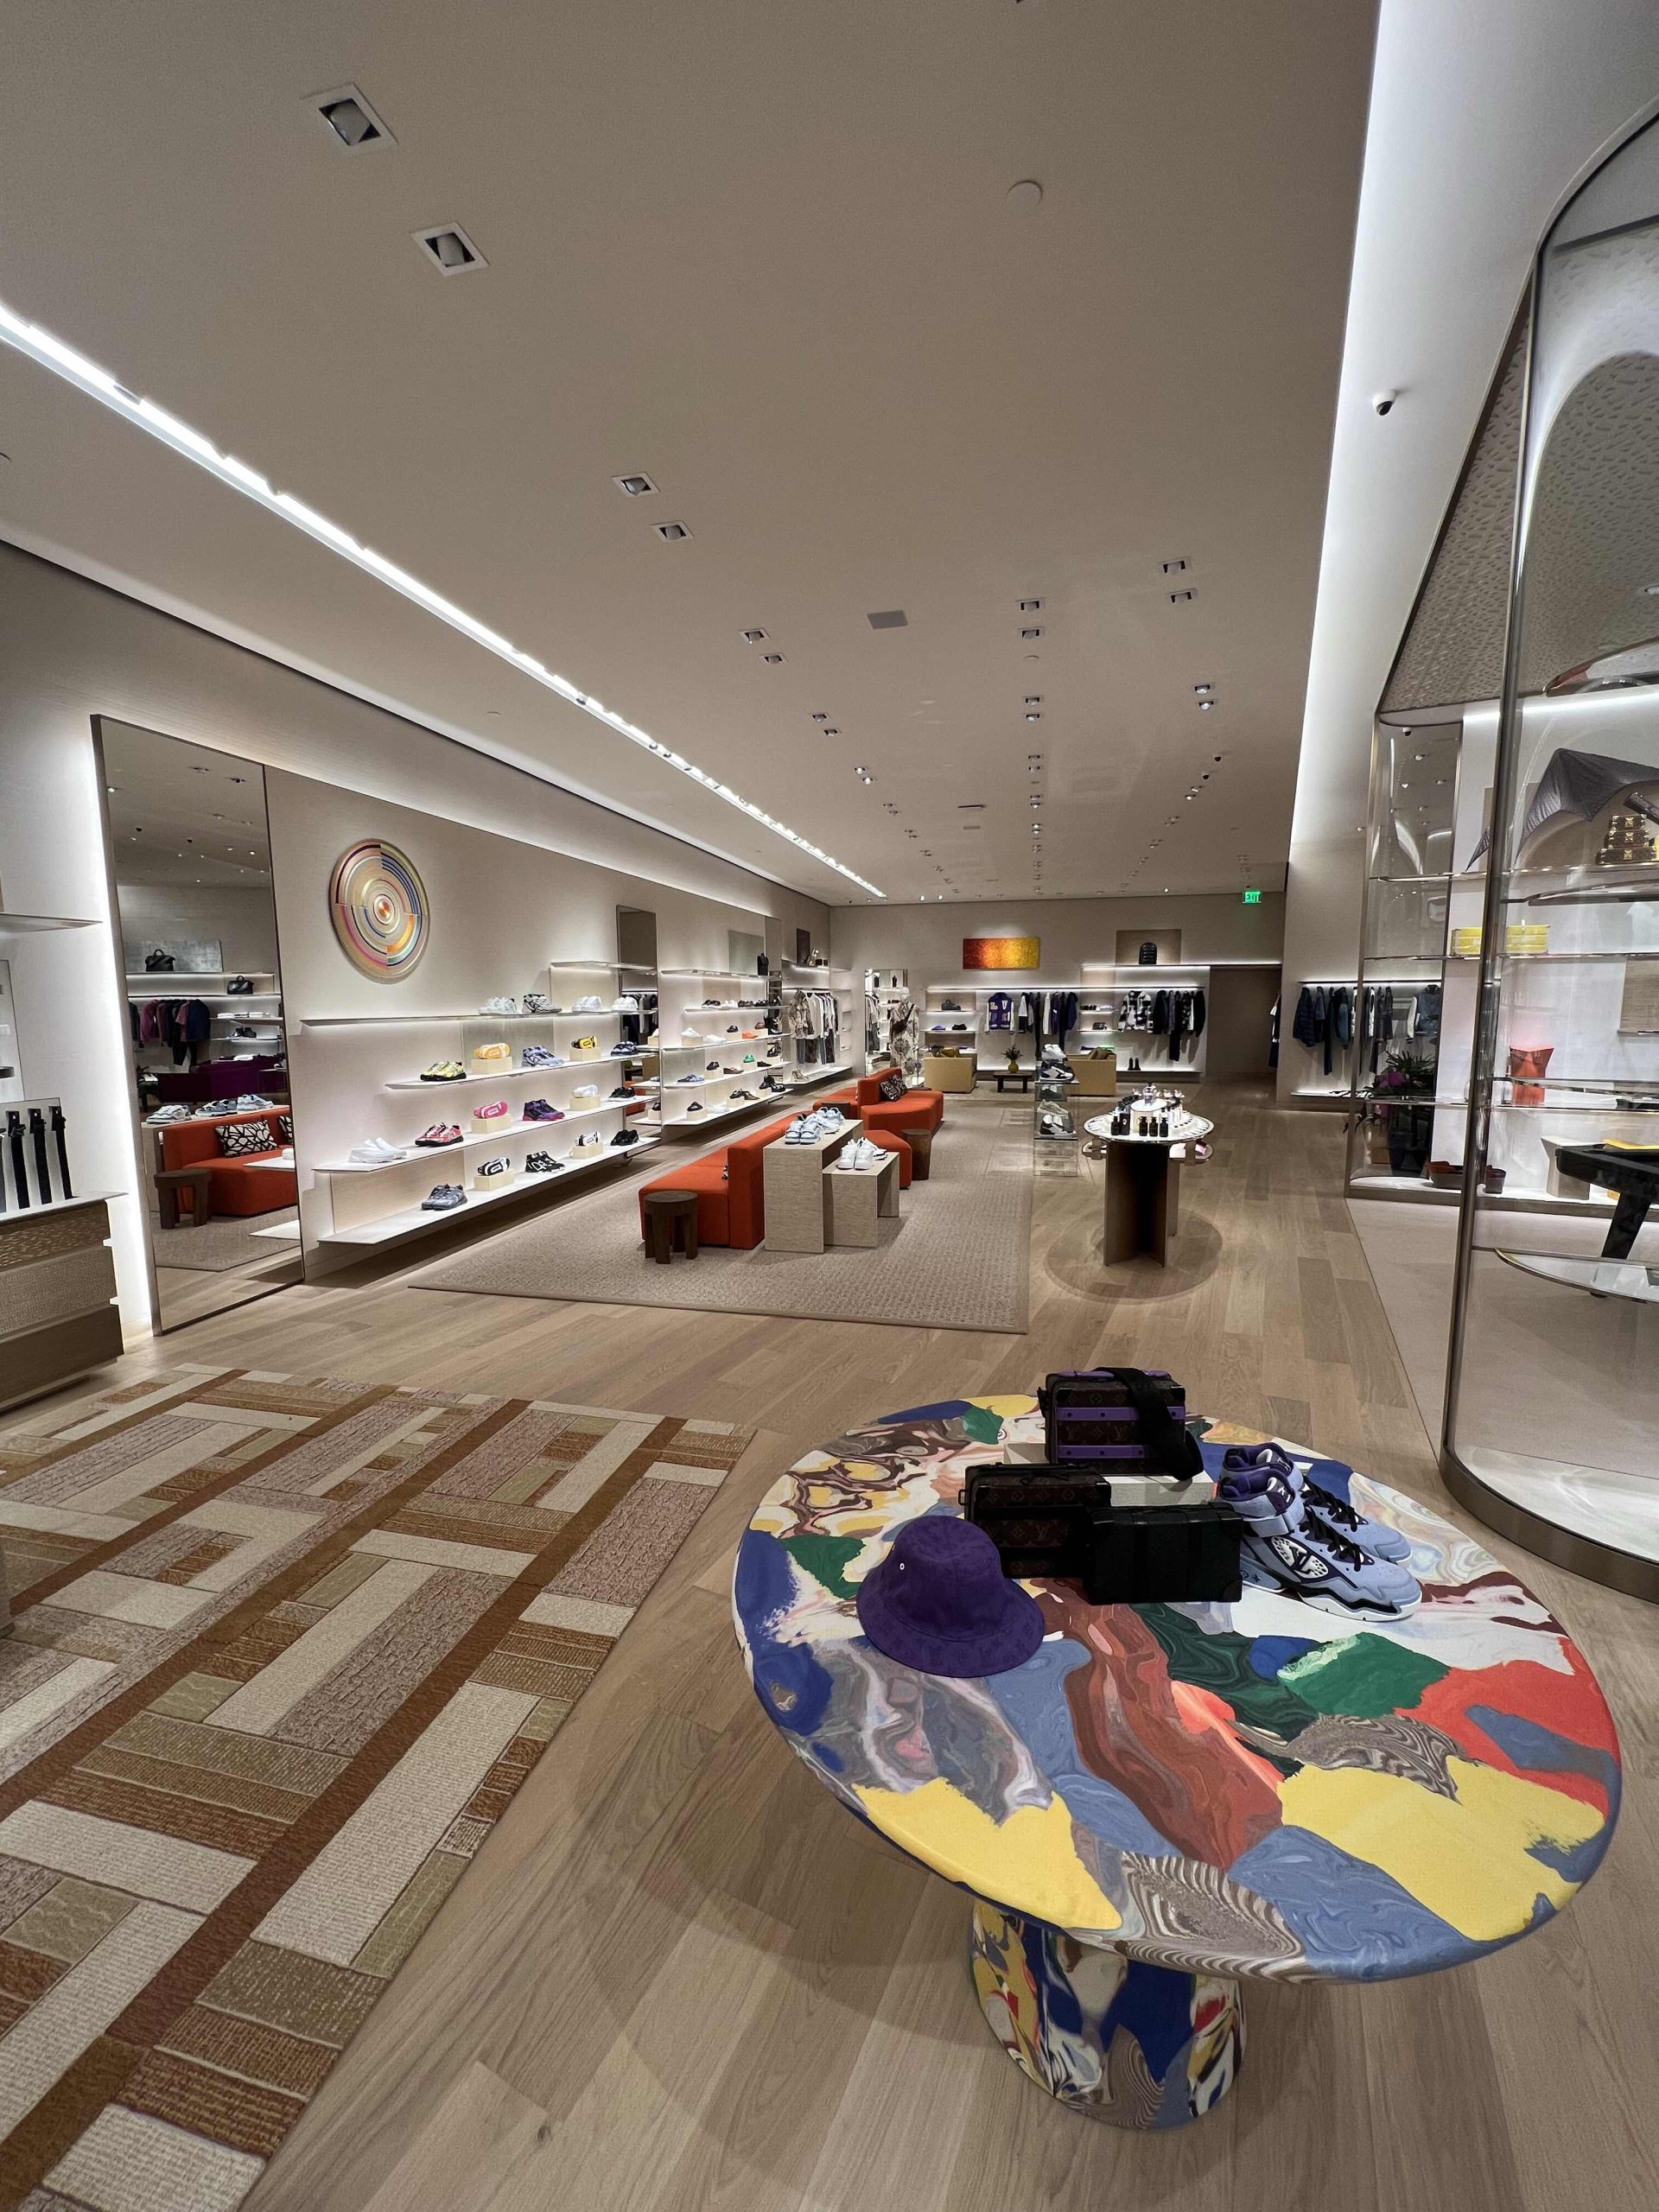 JRM Construction West Completes Multiple Build-Outs For Louis Vuitton At South  Coast Plaza